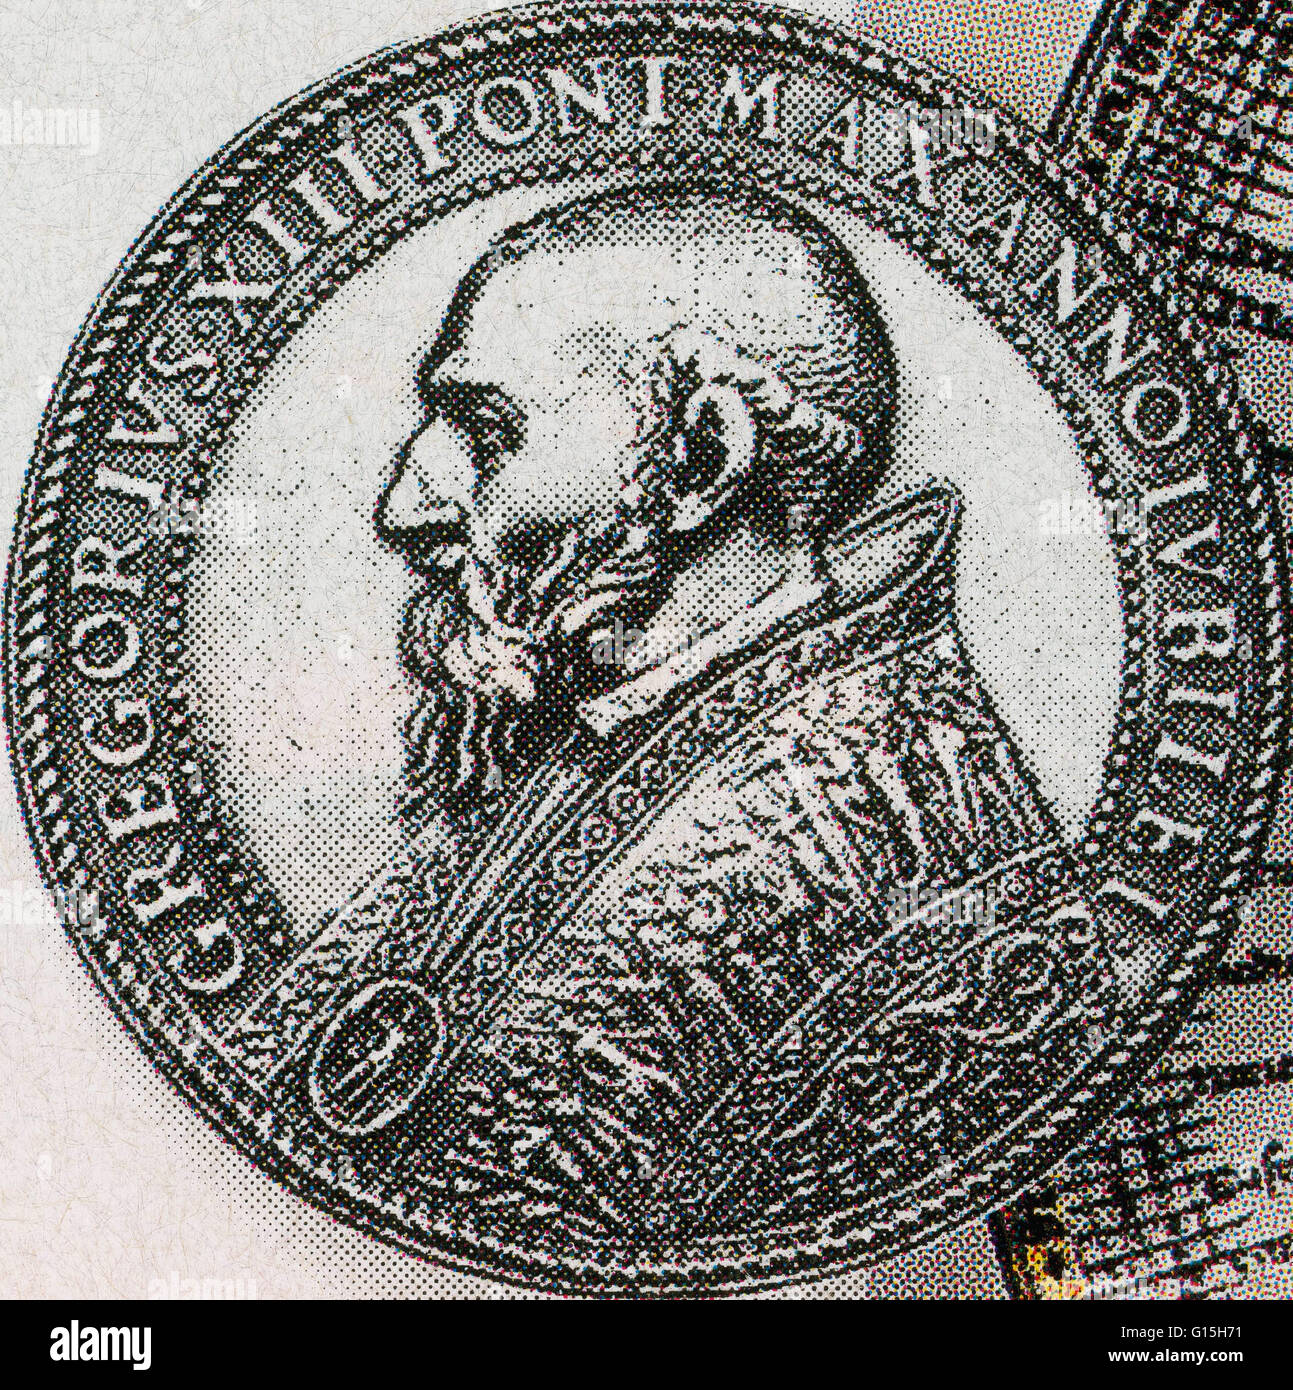 Pope Gregory XIII (January 7, 1502 - April 10, 1585), born Ugo Boncompagni, was Pope from 1572 to 1585. He is best known for commissioning and being the namesake for the Gregorian calendar, which remains the internationally-accepted civil calendar to this Stock Photo